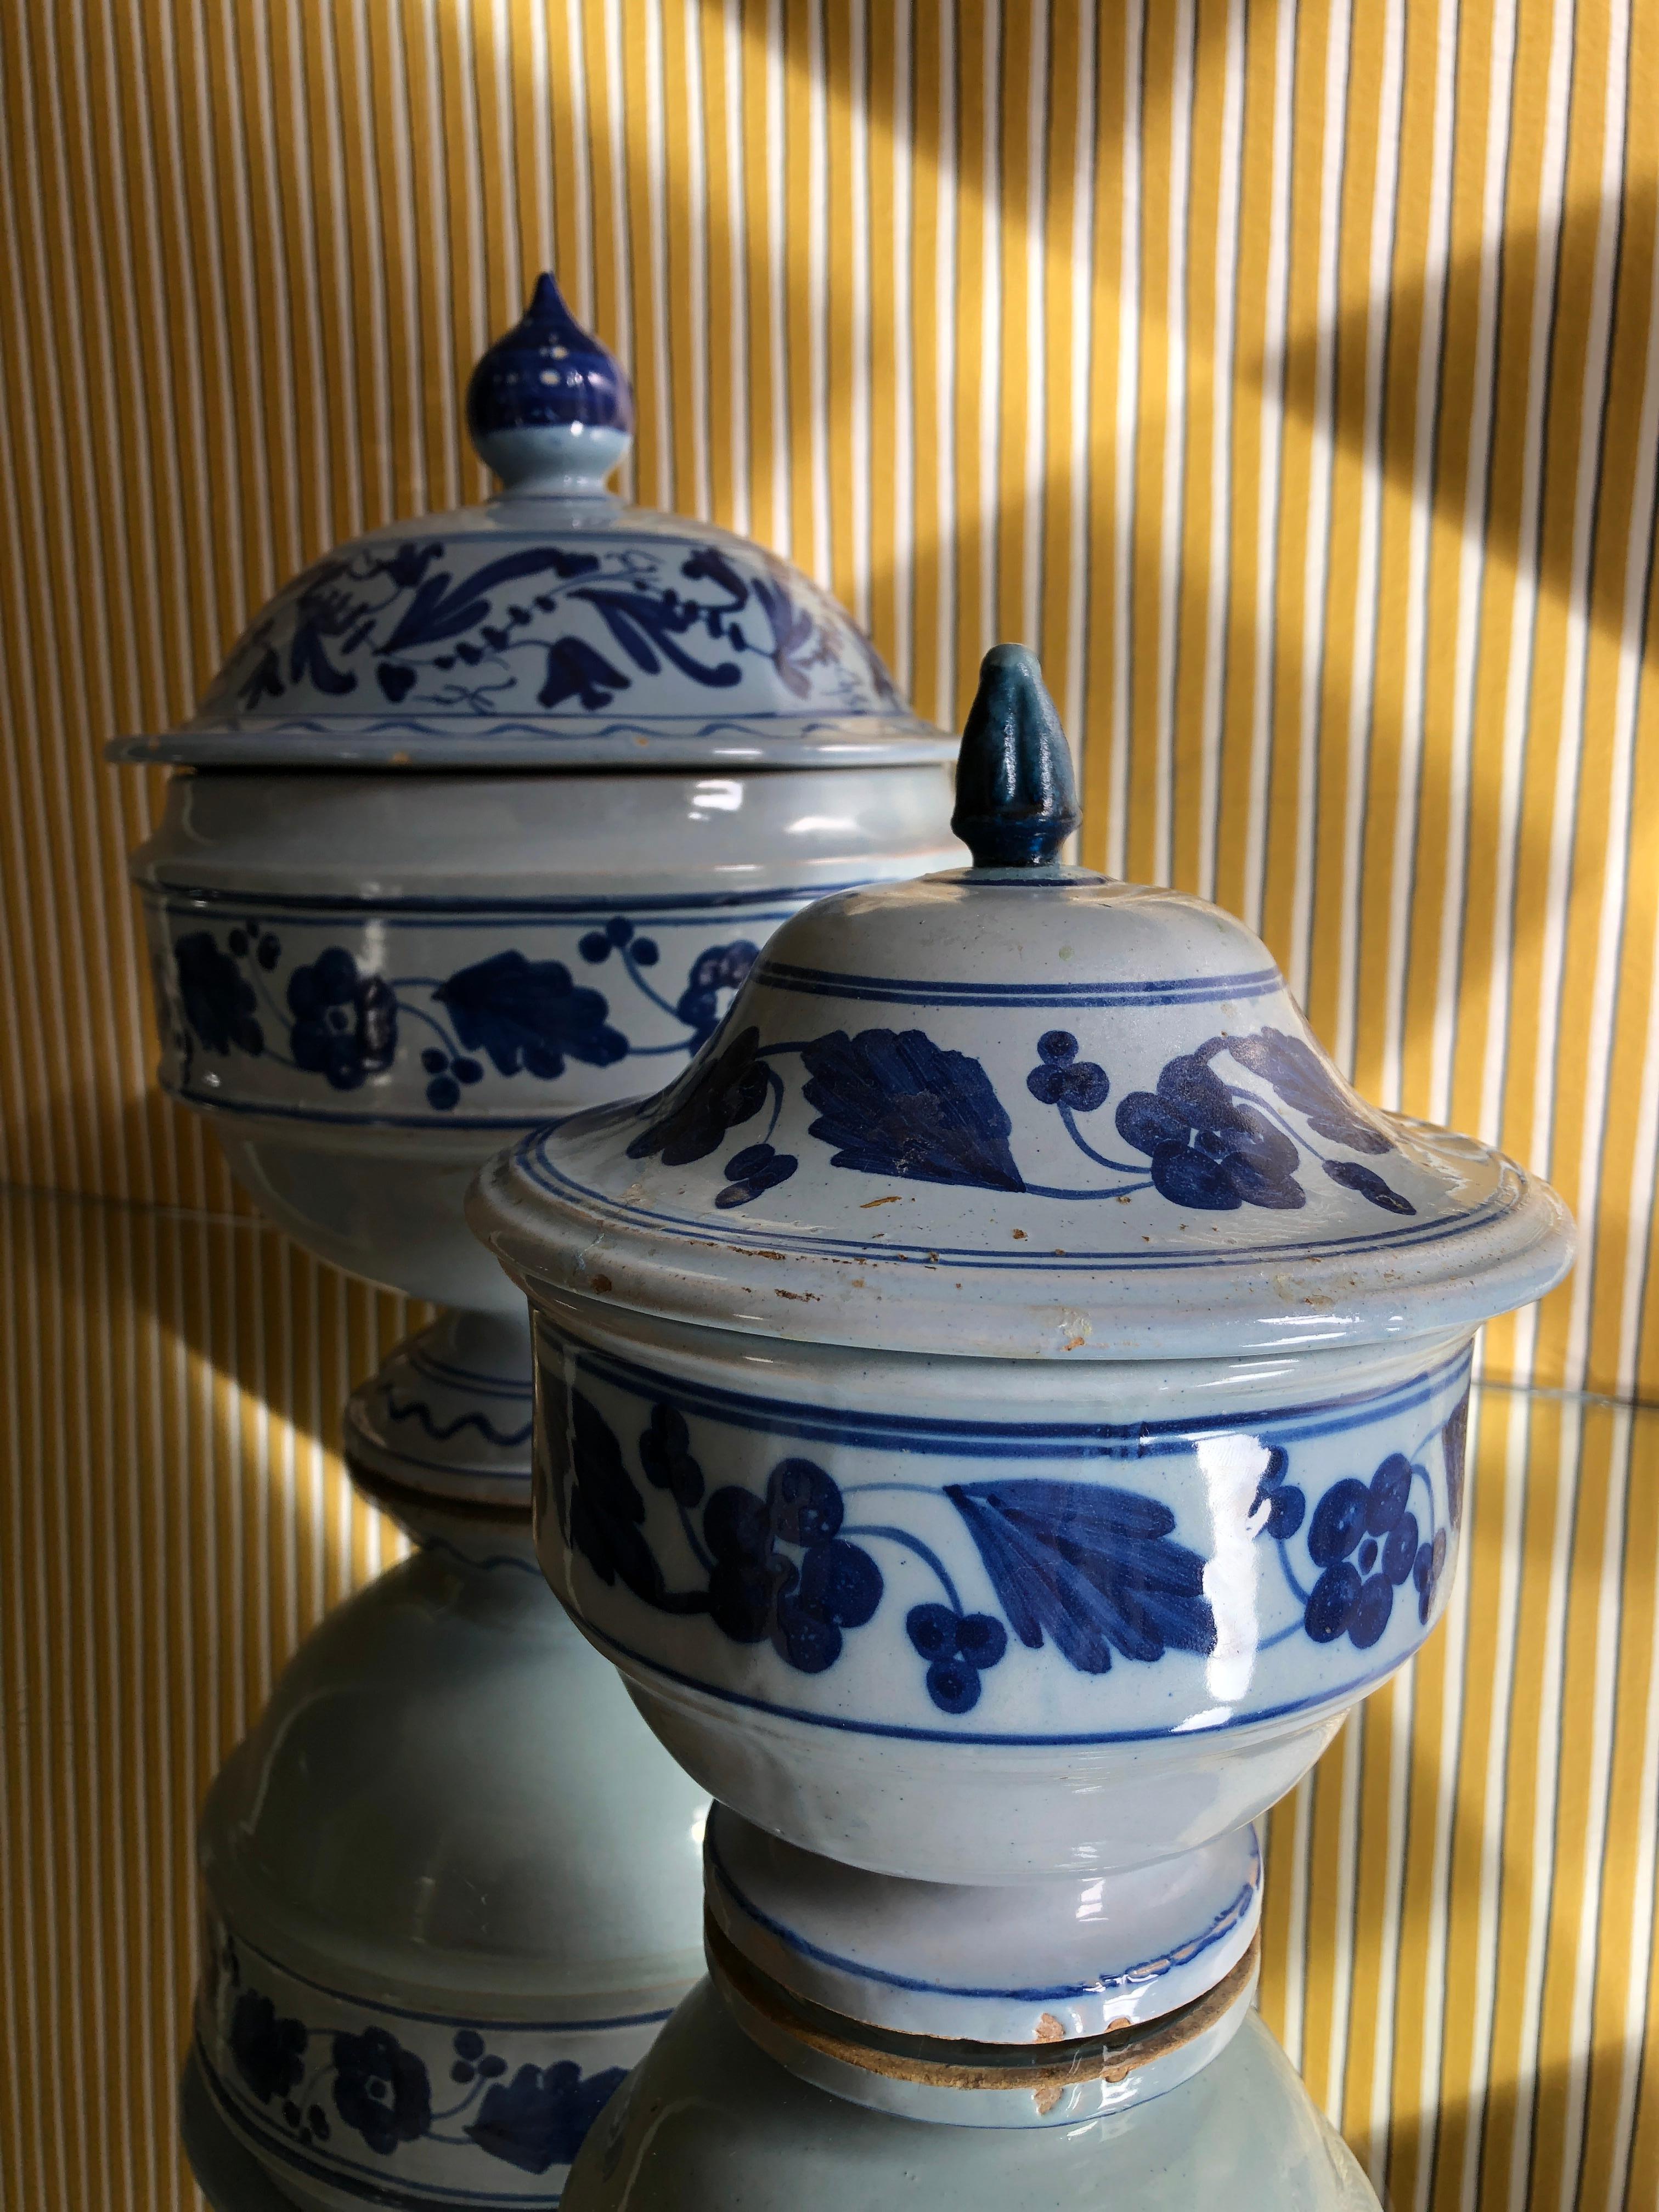 Ceramic Set of Ceramique Tureens with Blue Flower Decorations, Italy, Late 19th Century